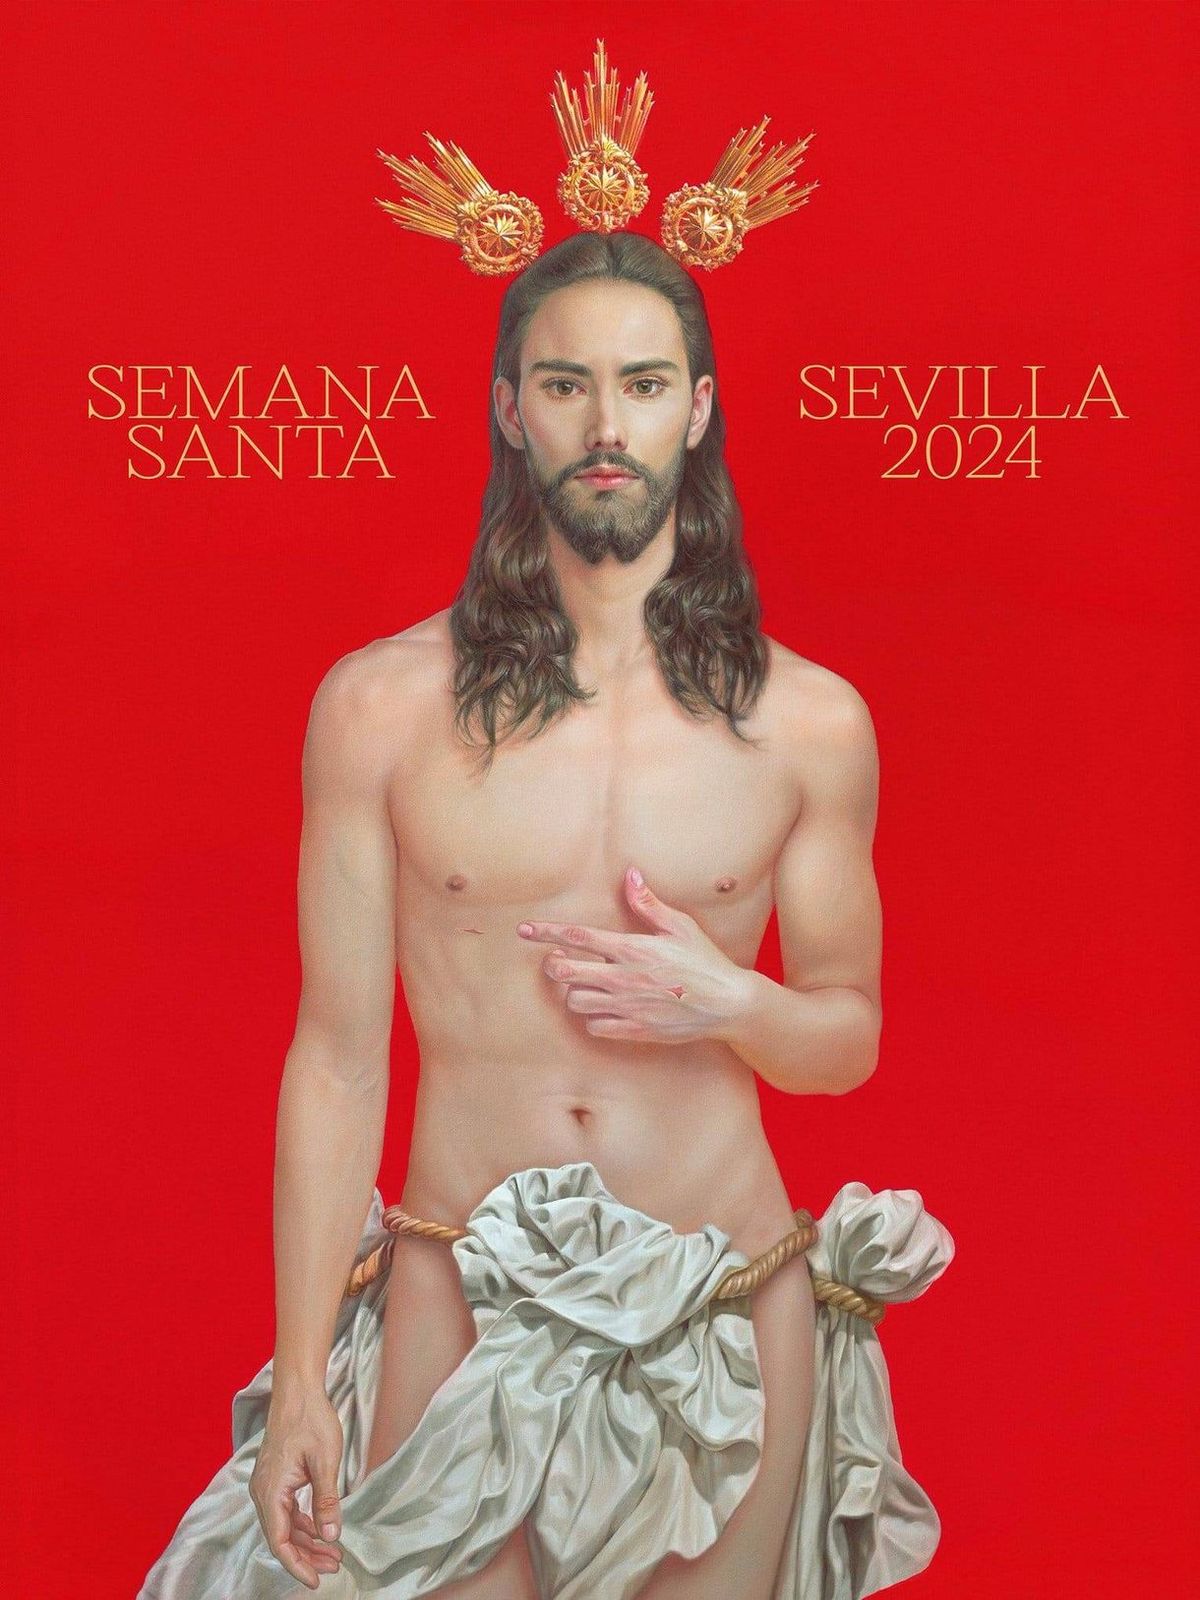 A poster for Holy Week in Seville by Salustiano García has sparked controversy Image: Courtesy of Seville City Council